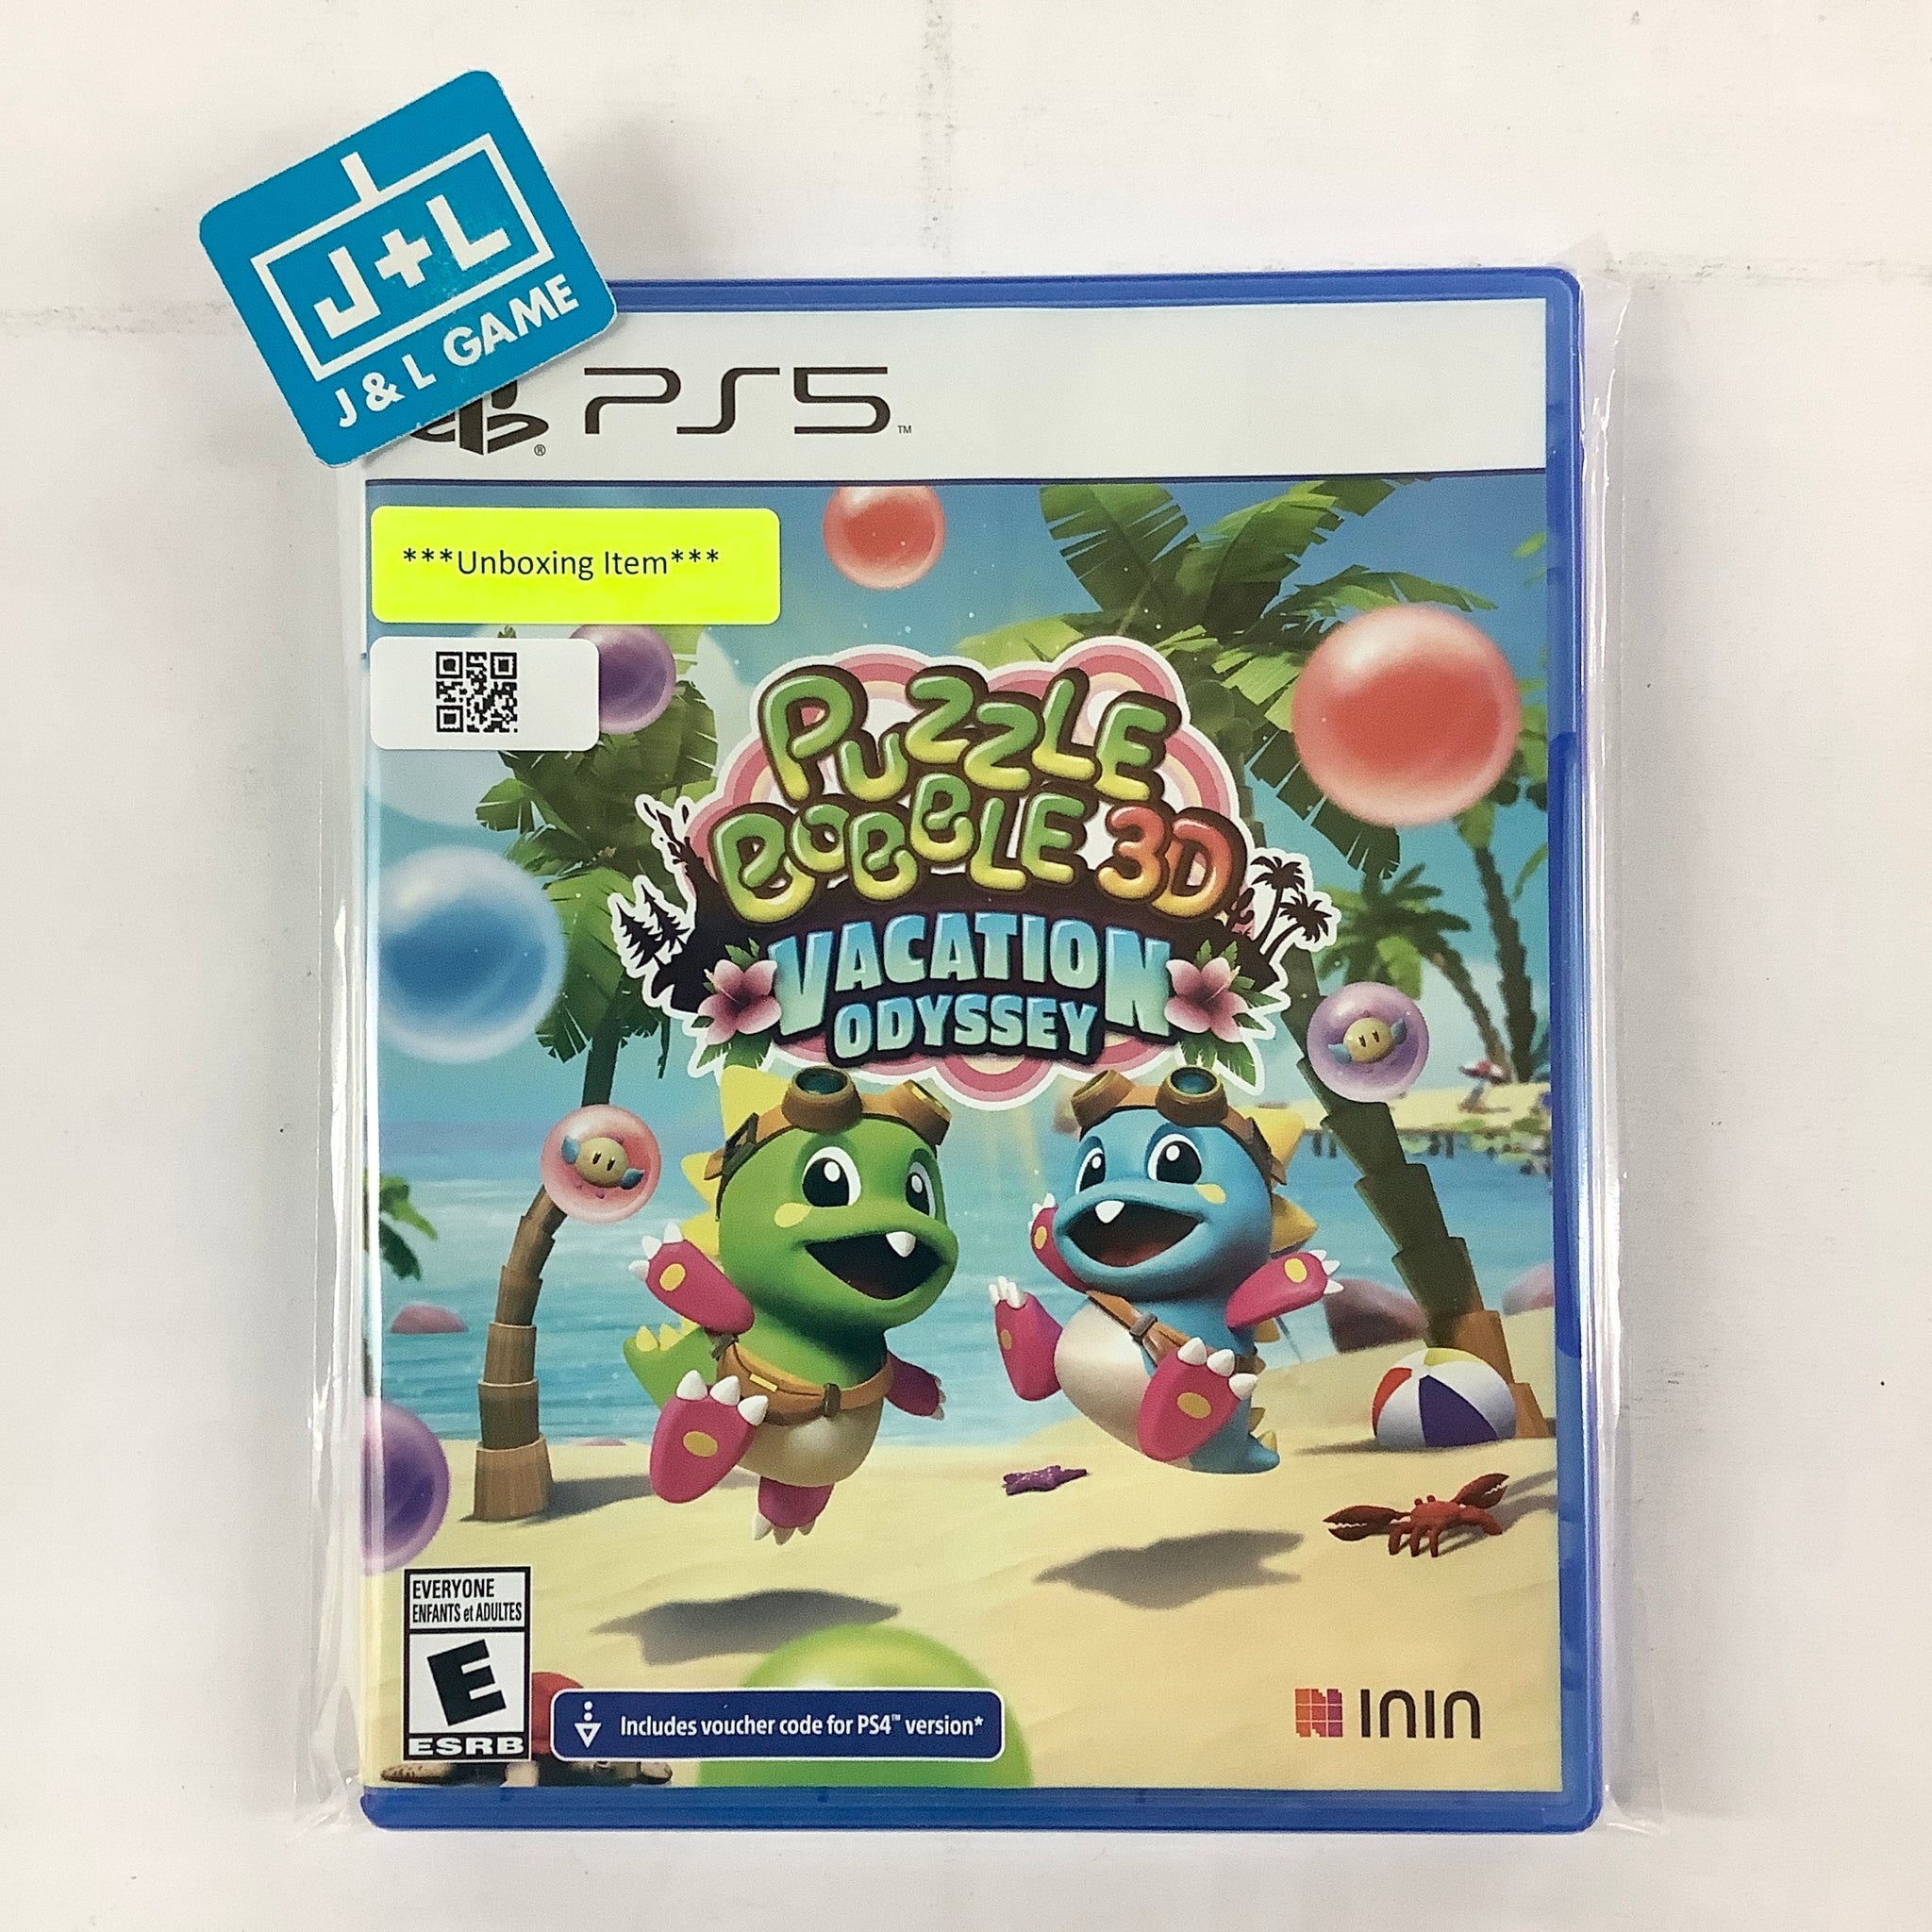 Puzzle Bobble 3D: Vacation Odyssey - (PS5) PlayStation 5 [UNBOXING] Video Games ININ   